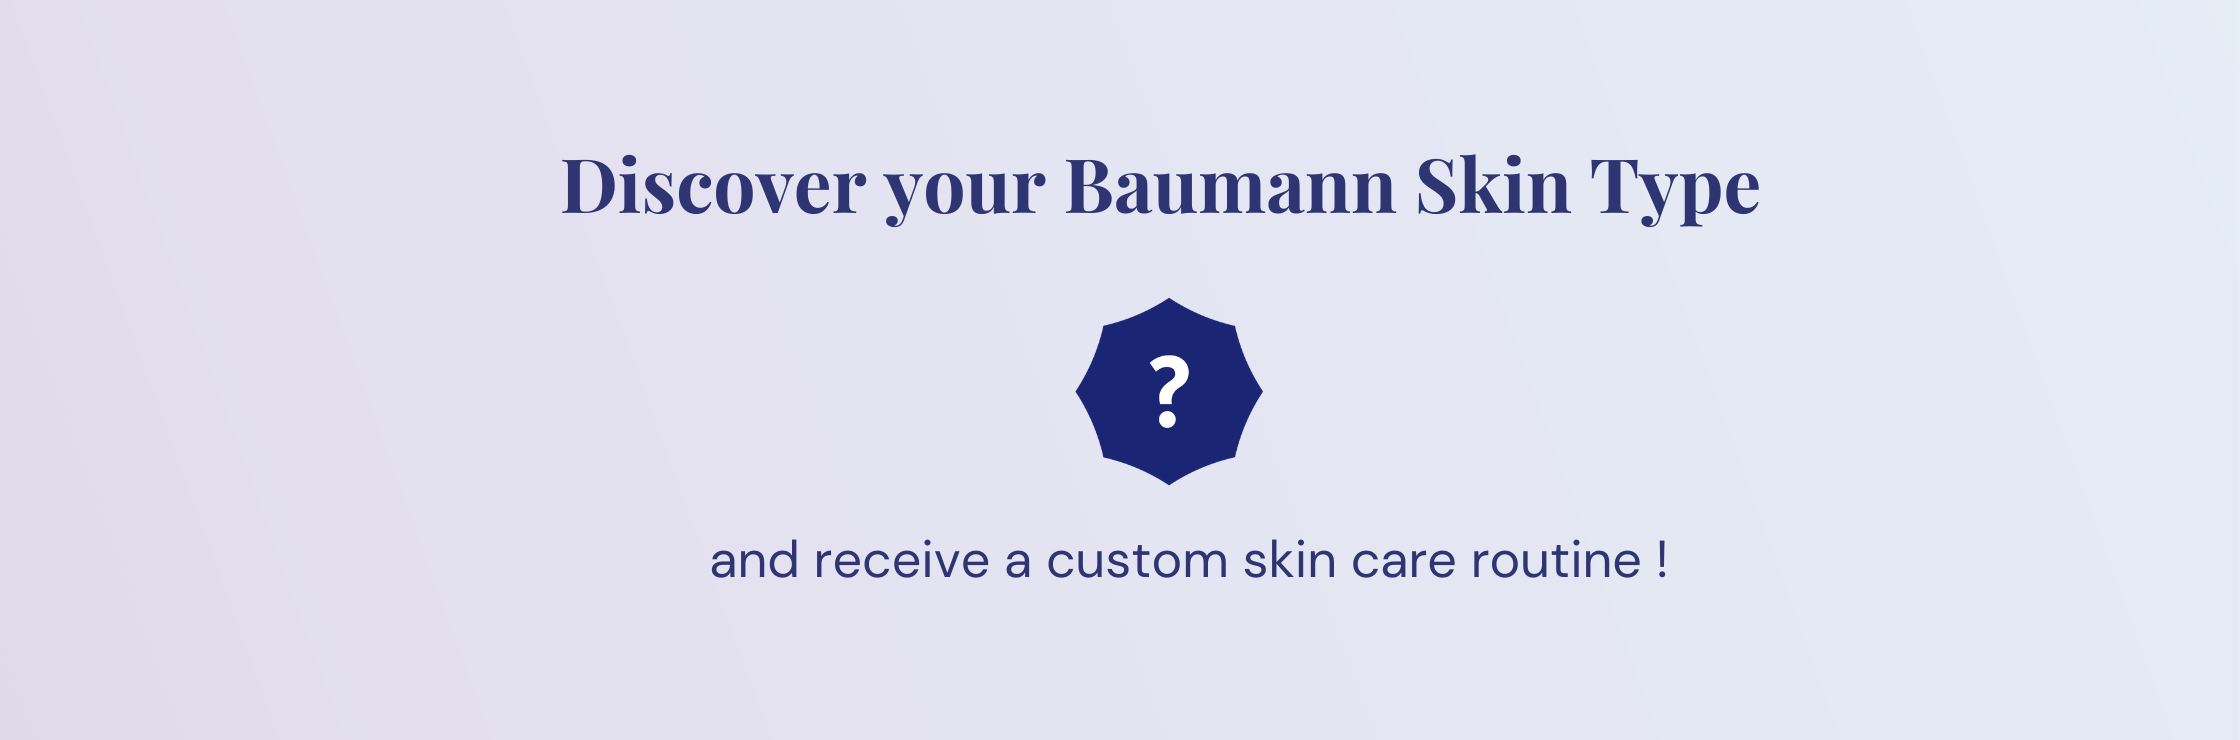 discover your Baumann skin type.png